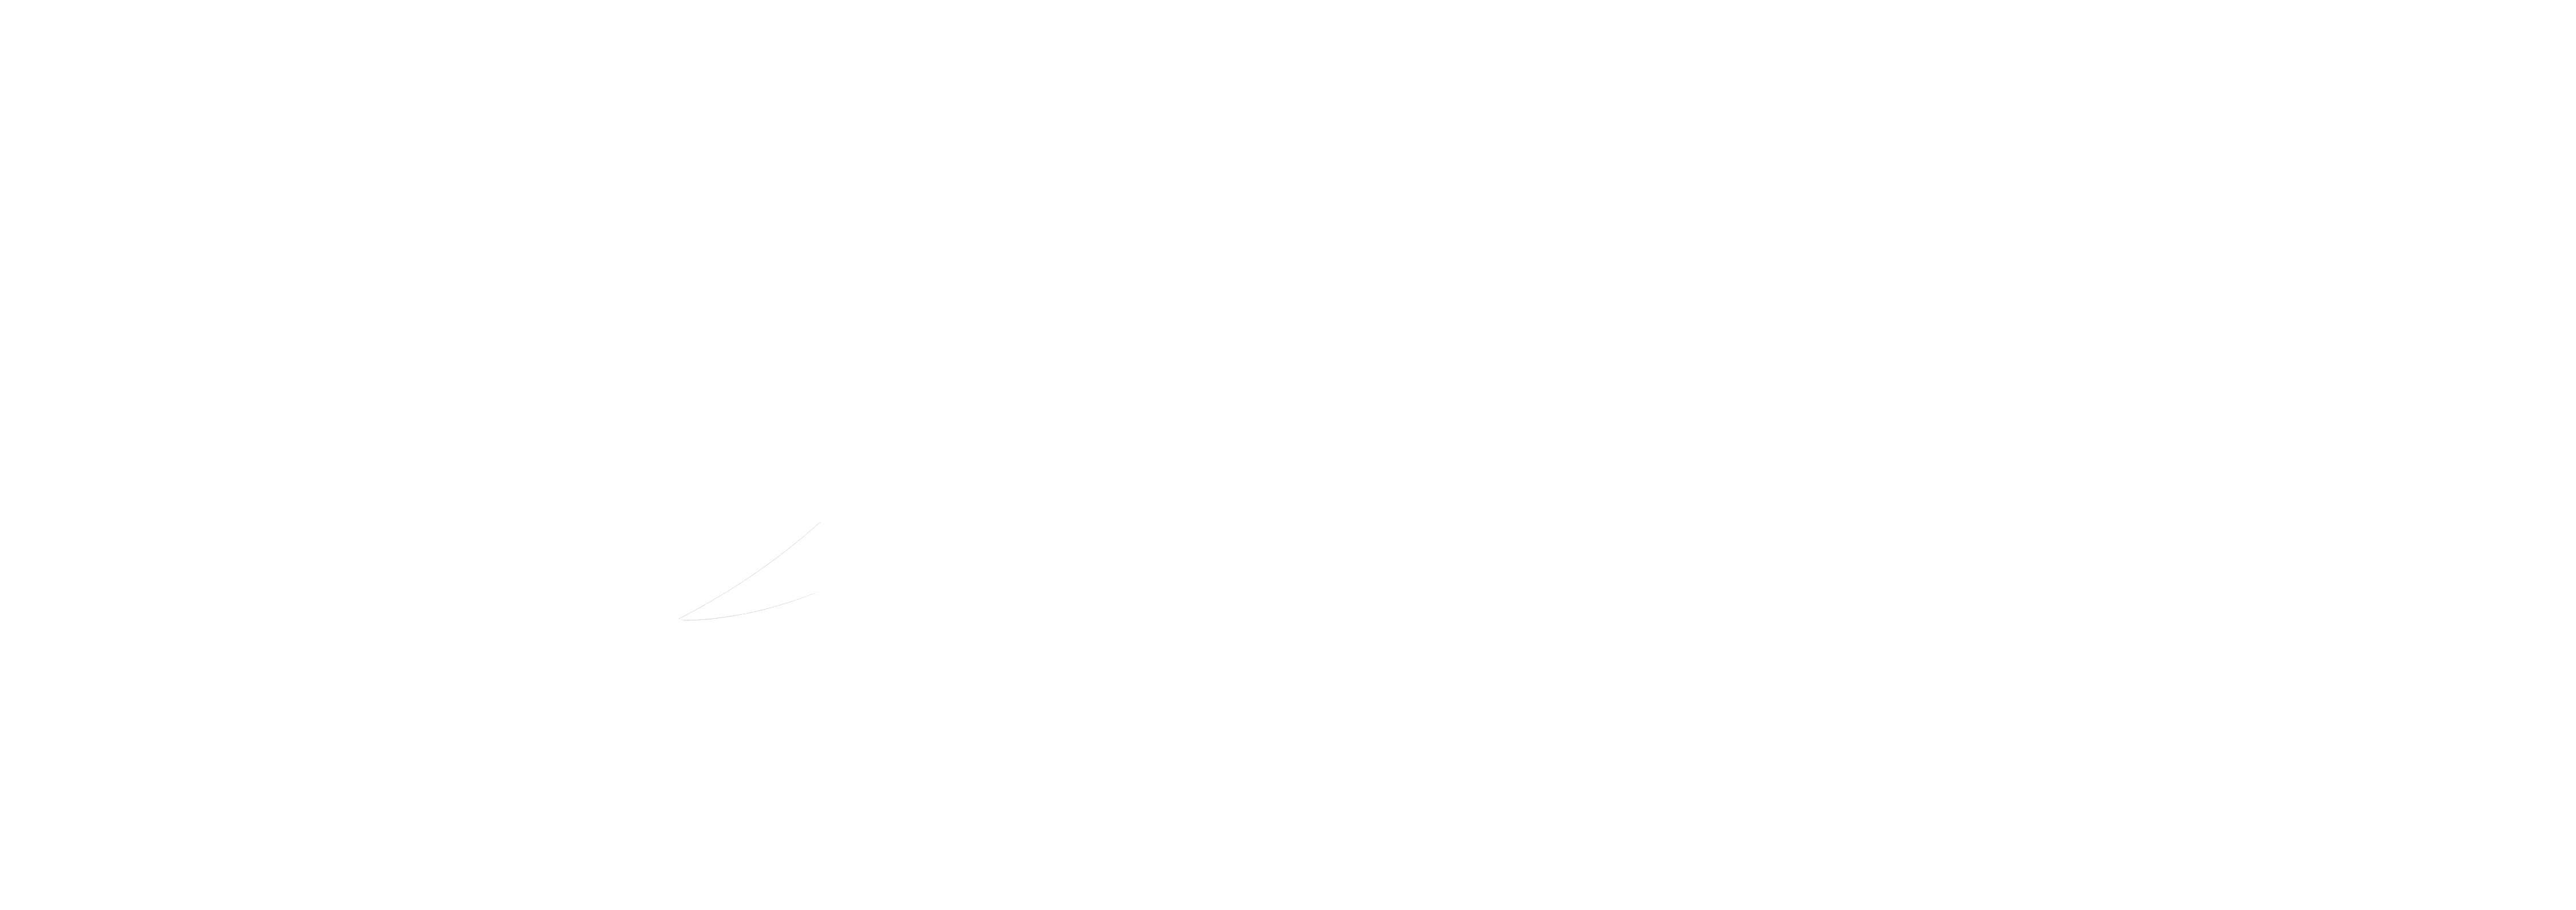 Rogers Goosedown Outfitters